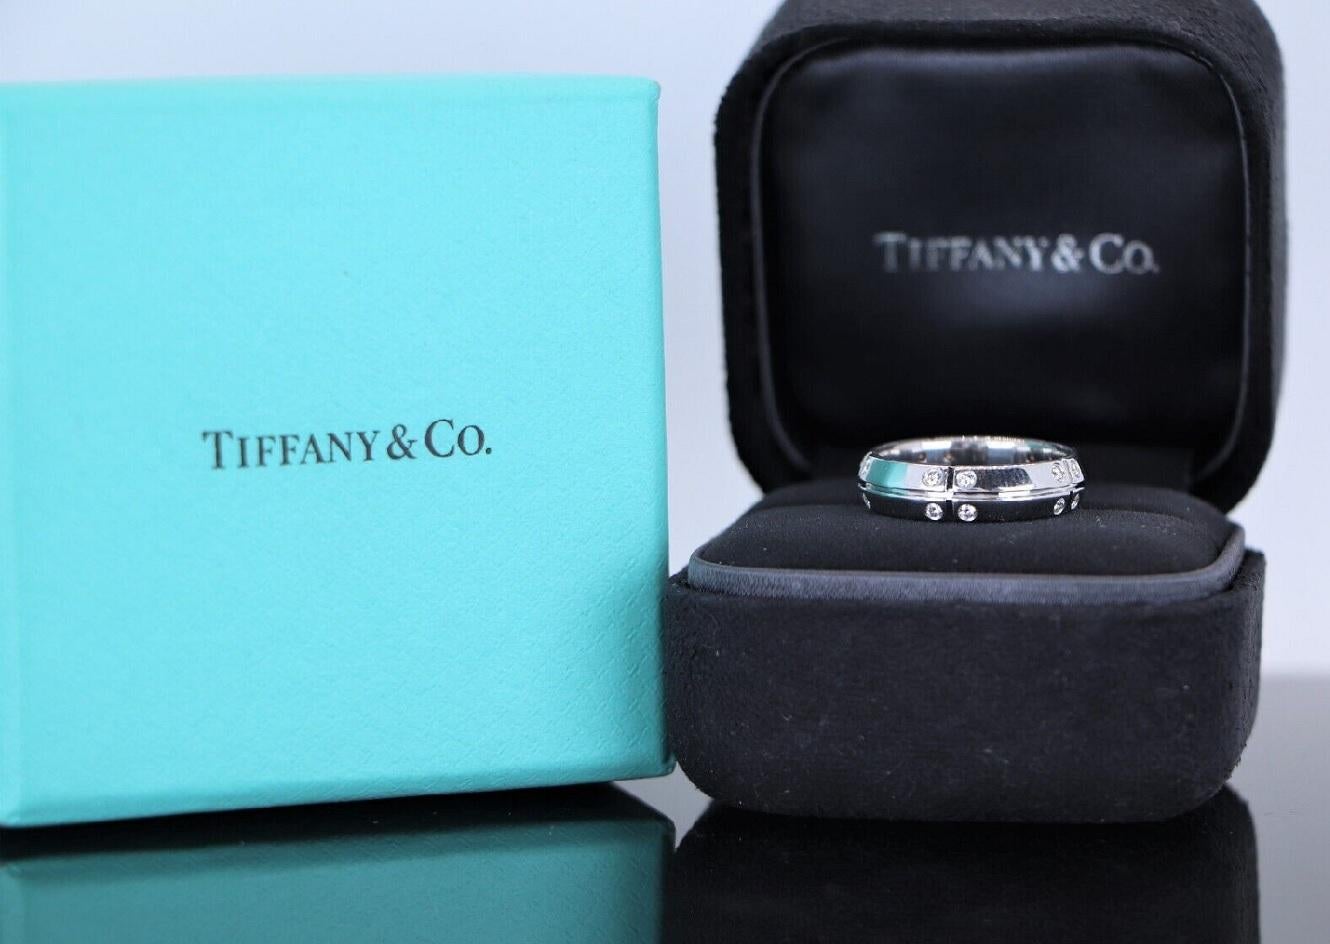 Brand Tiffany & co 
Type ring
Gender women
Ring size 6.5
Weight 5.9gr
Ring width 5mm
Ring length 20.9mm
Metal 18k white gold 750
Style modern
Stone cut round 
Stone type diamond 
Diamonds: Approx. .20 CTW F-G VS round diamonds